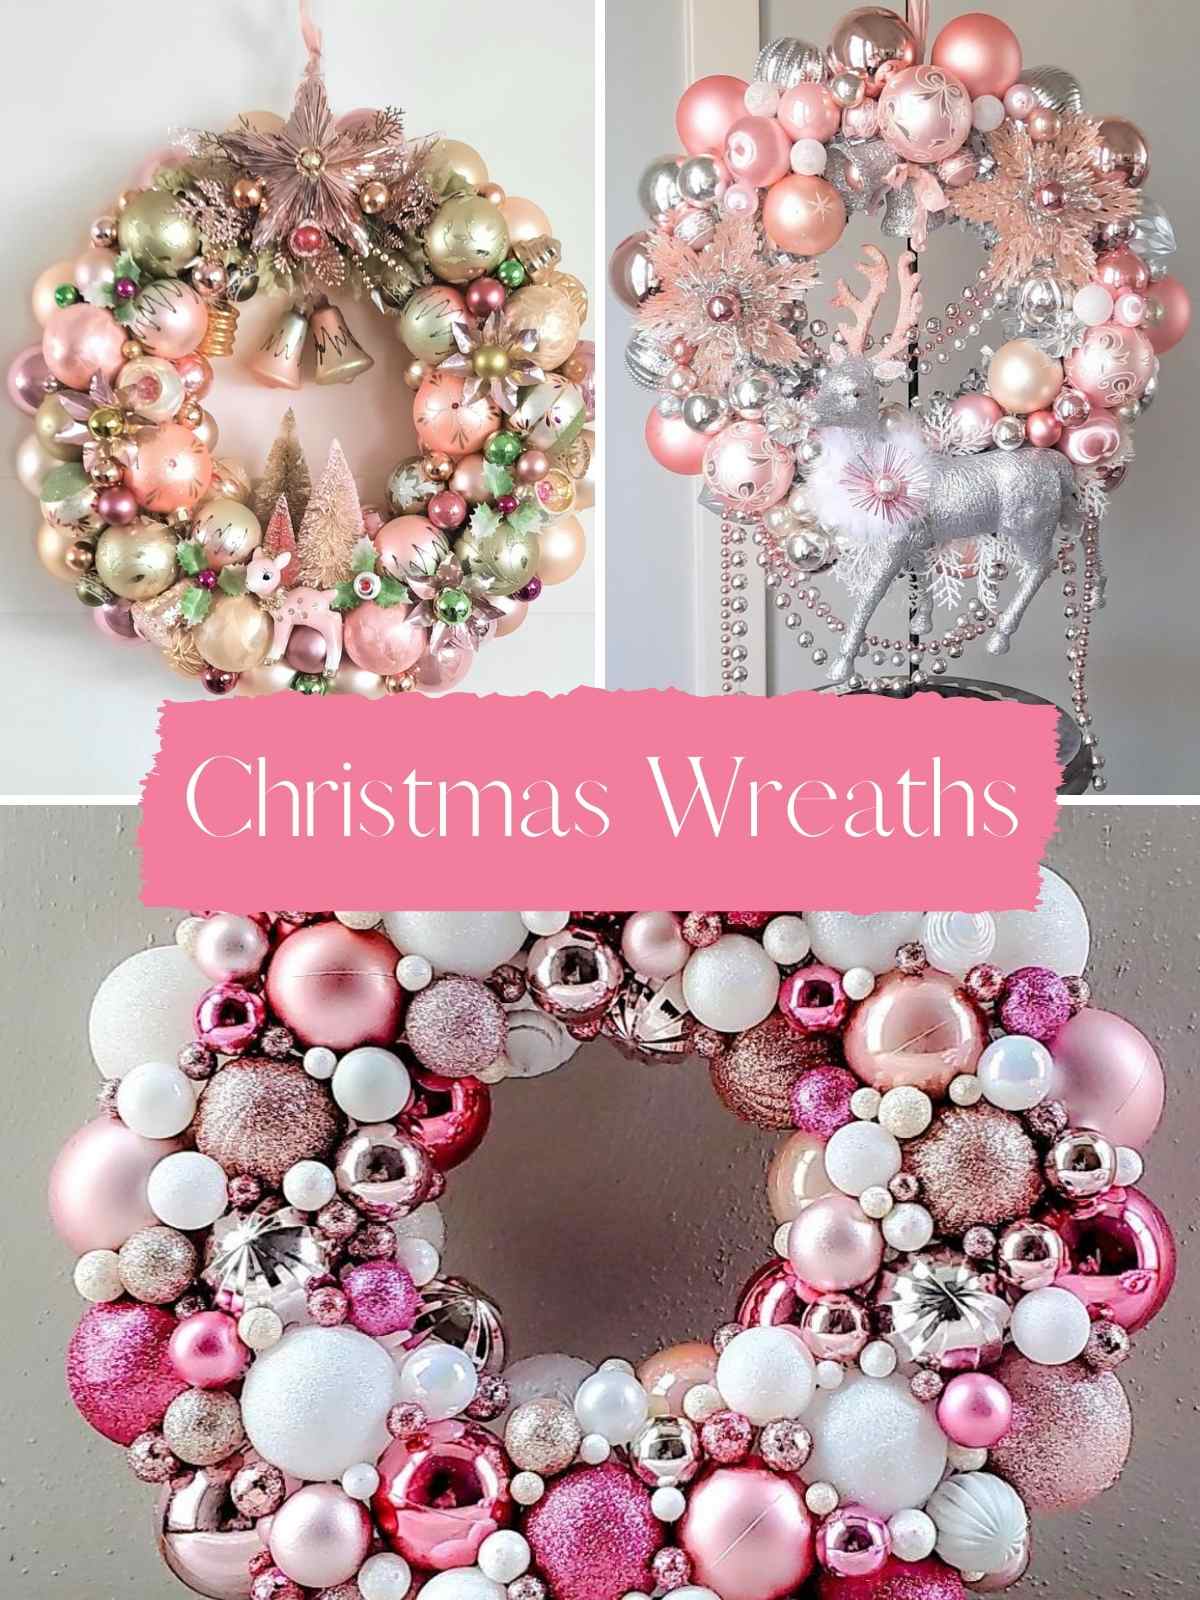 Pink Christmas Wreaths With ornaments and bulbs